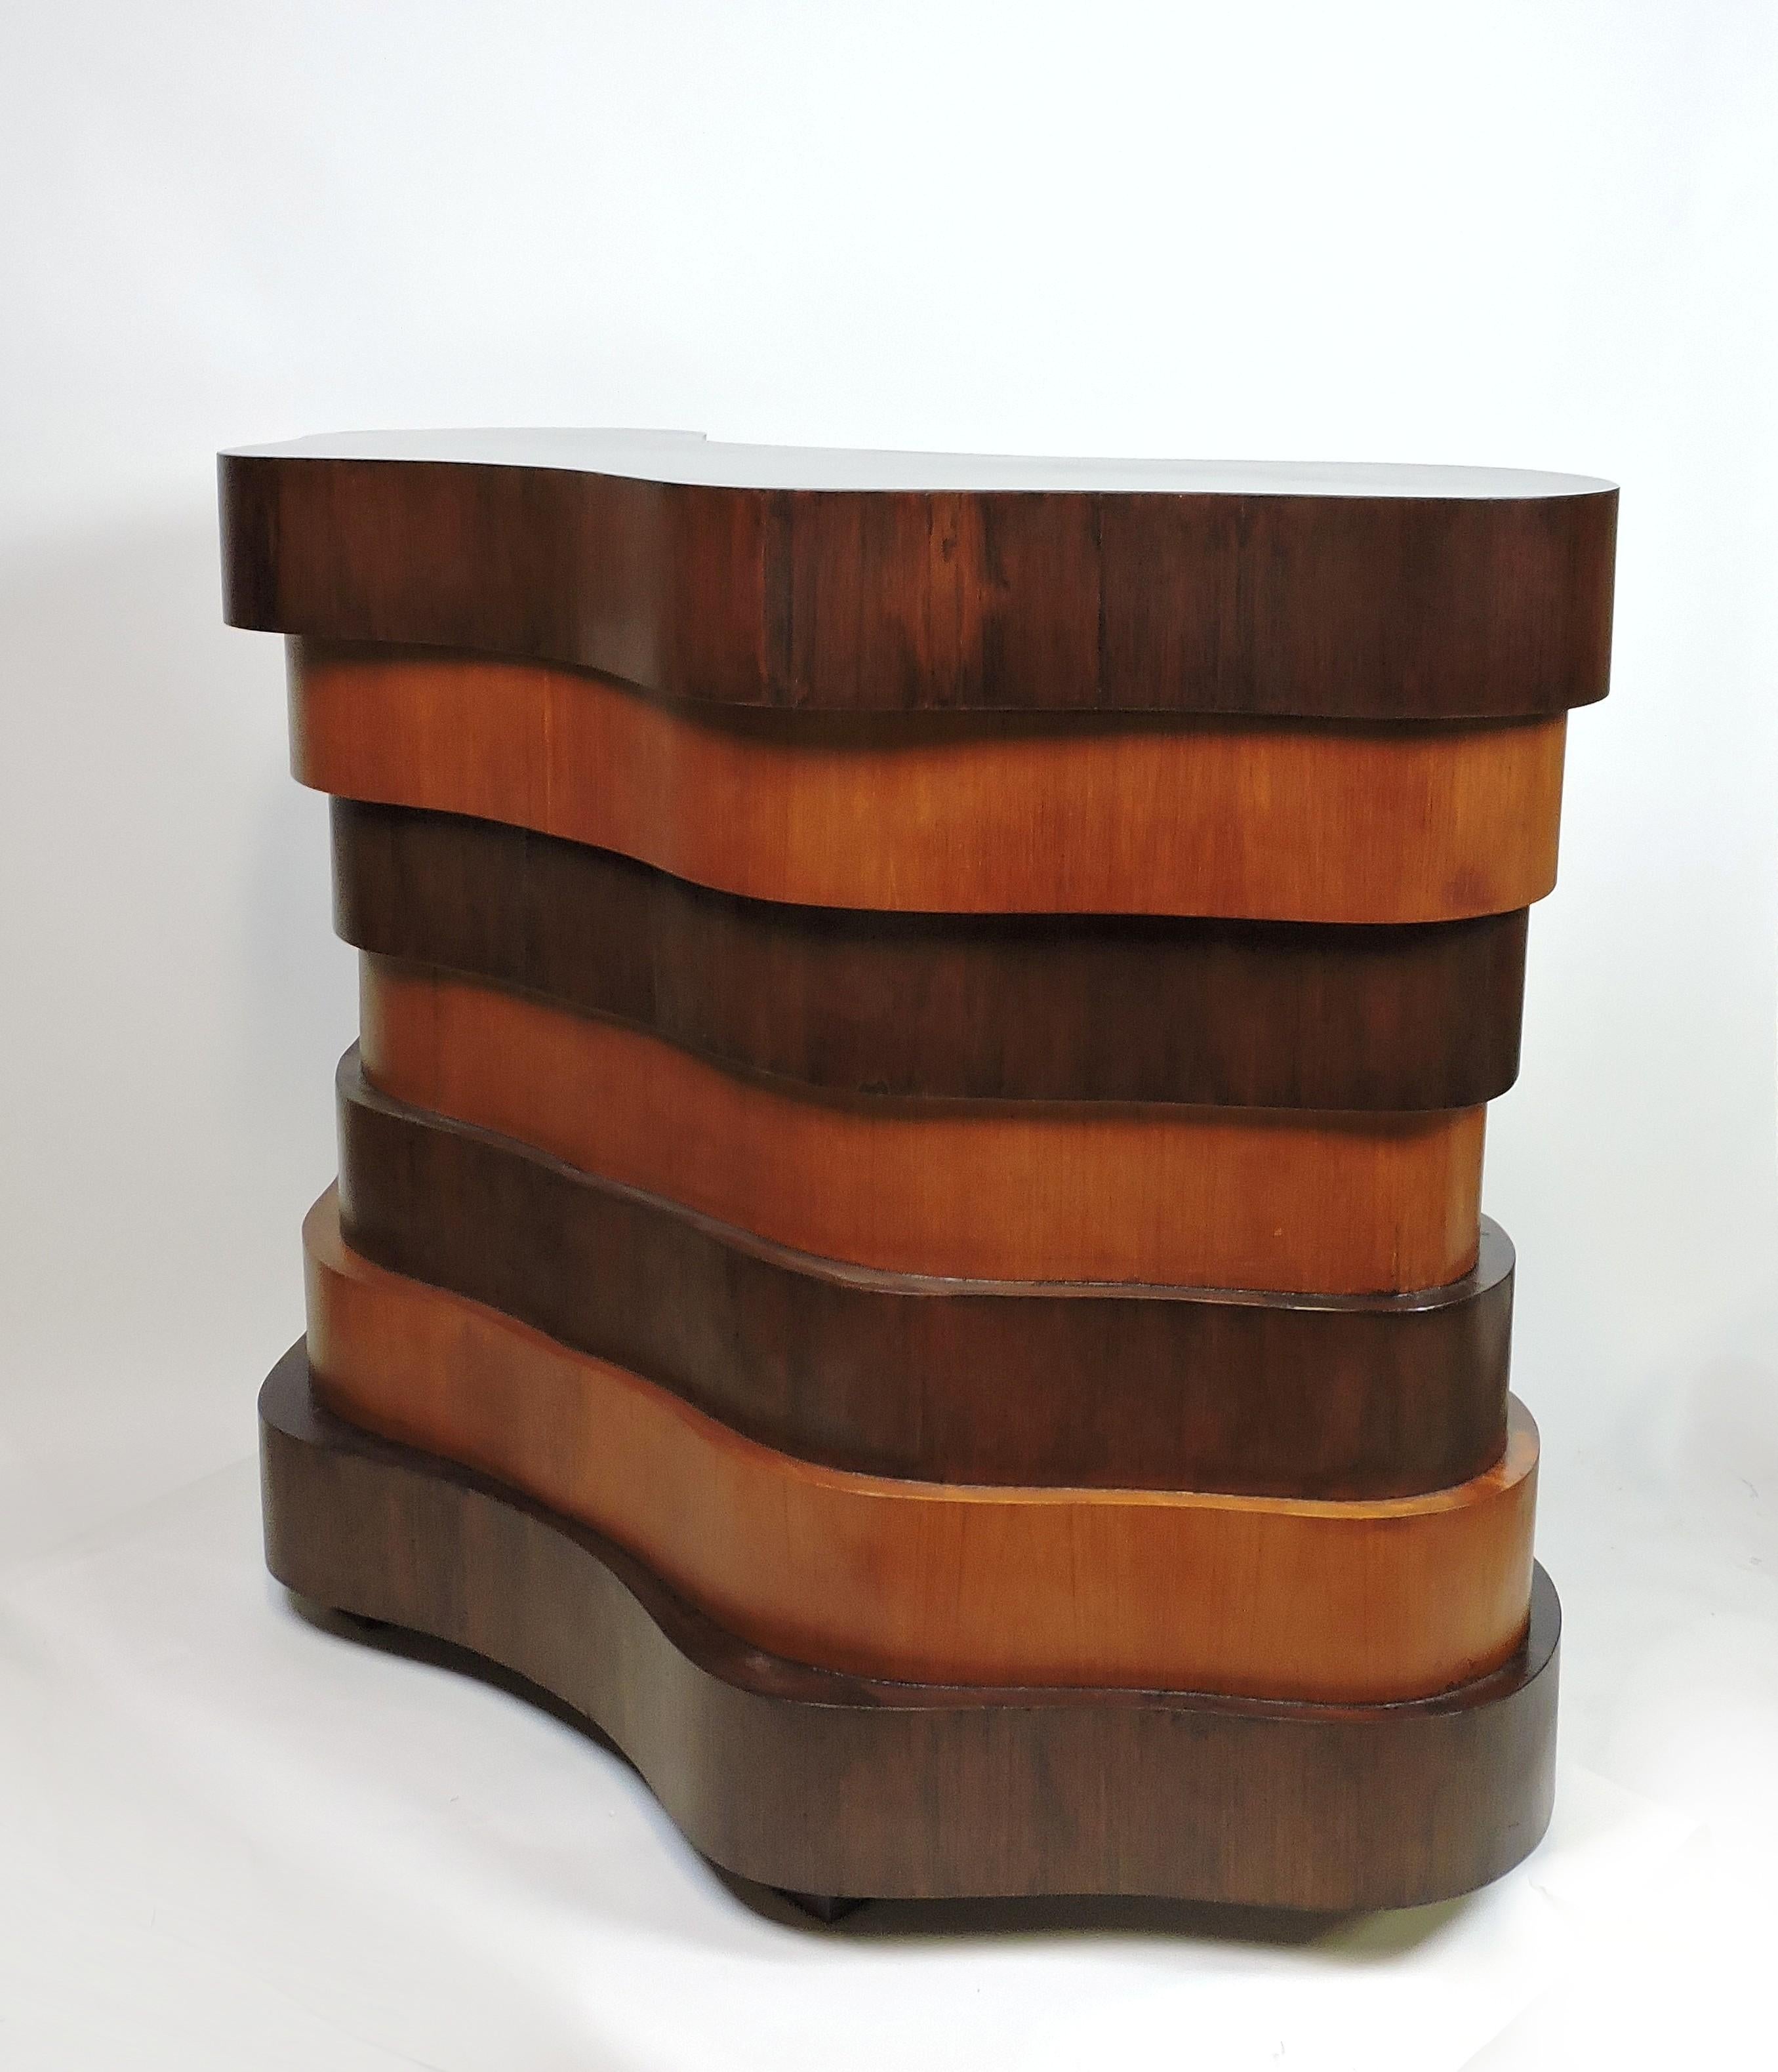 Unknown Art Deco or Mid-Century Modern Curved and Wavy Stacked Biomorphic Dry Bar